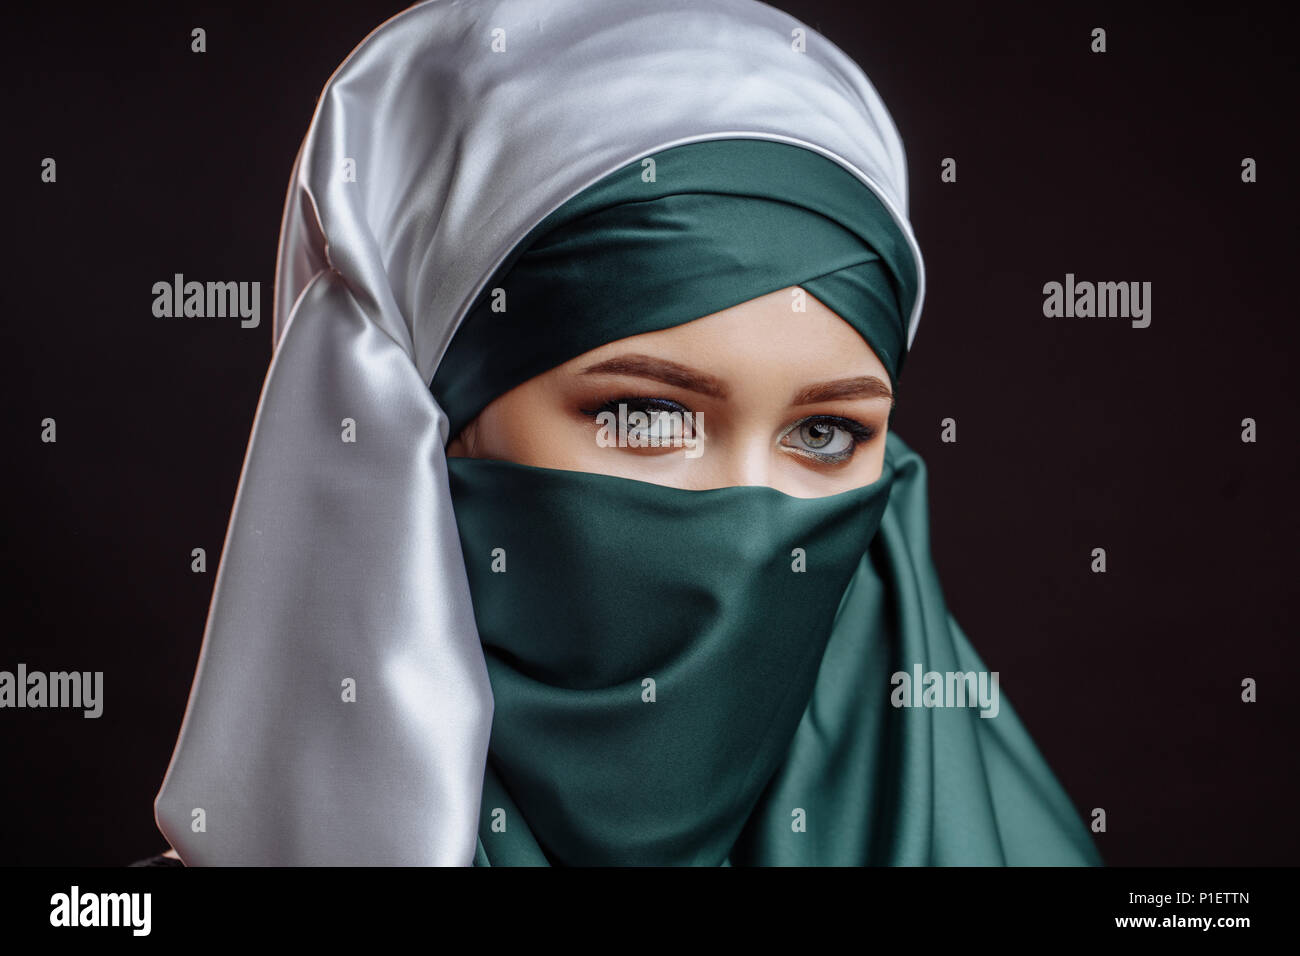 woman wearing Islamic outfit. humility idea. heavenly thoughts Stock Photo